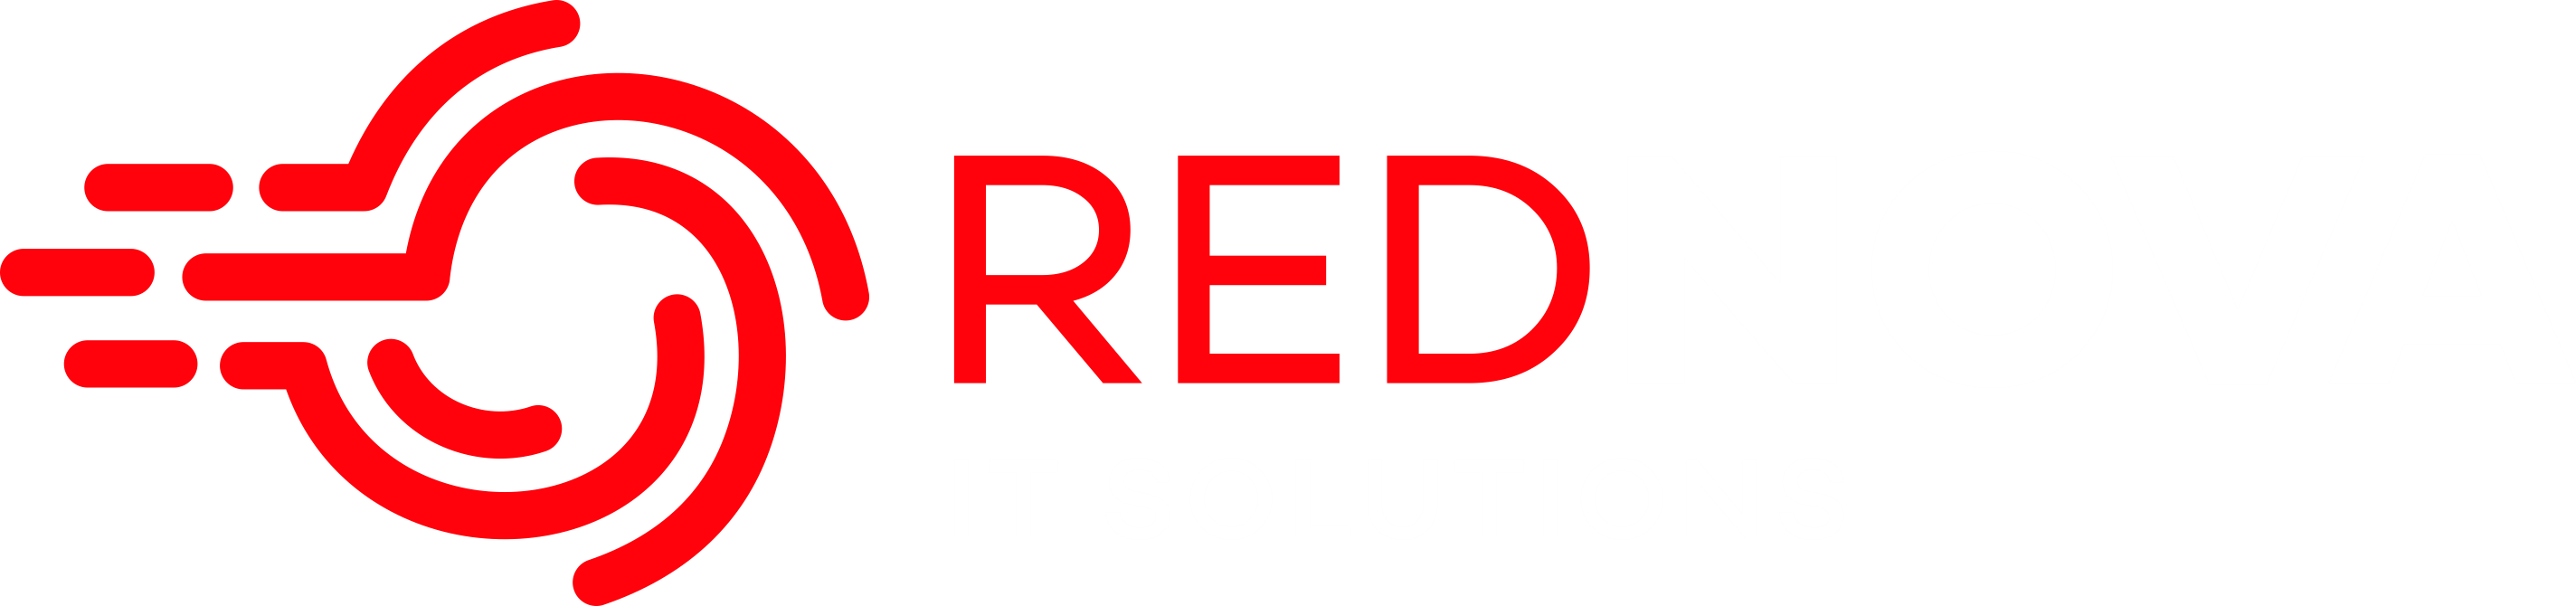 Red Nova IT Support, Security, Web Development and Communications